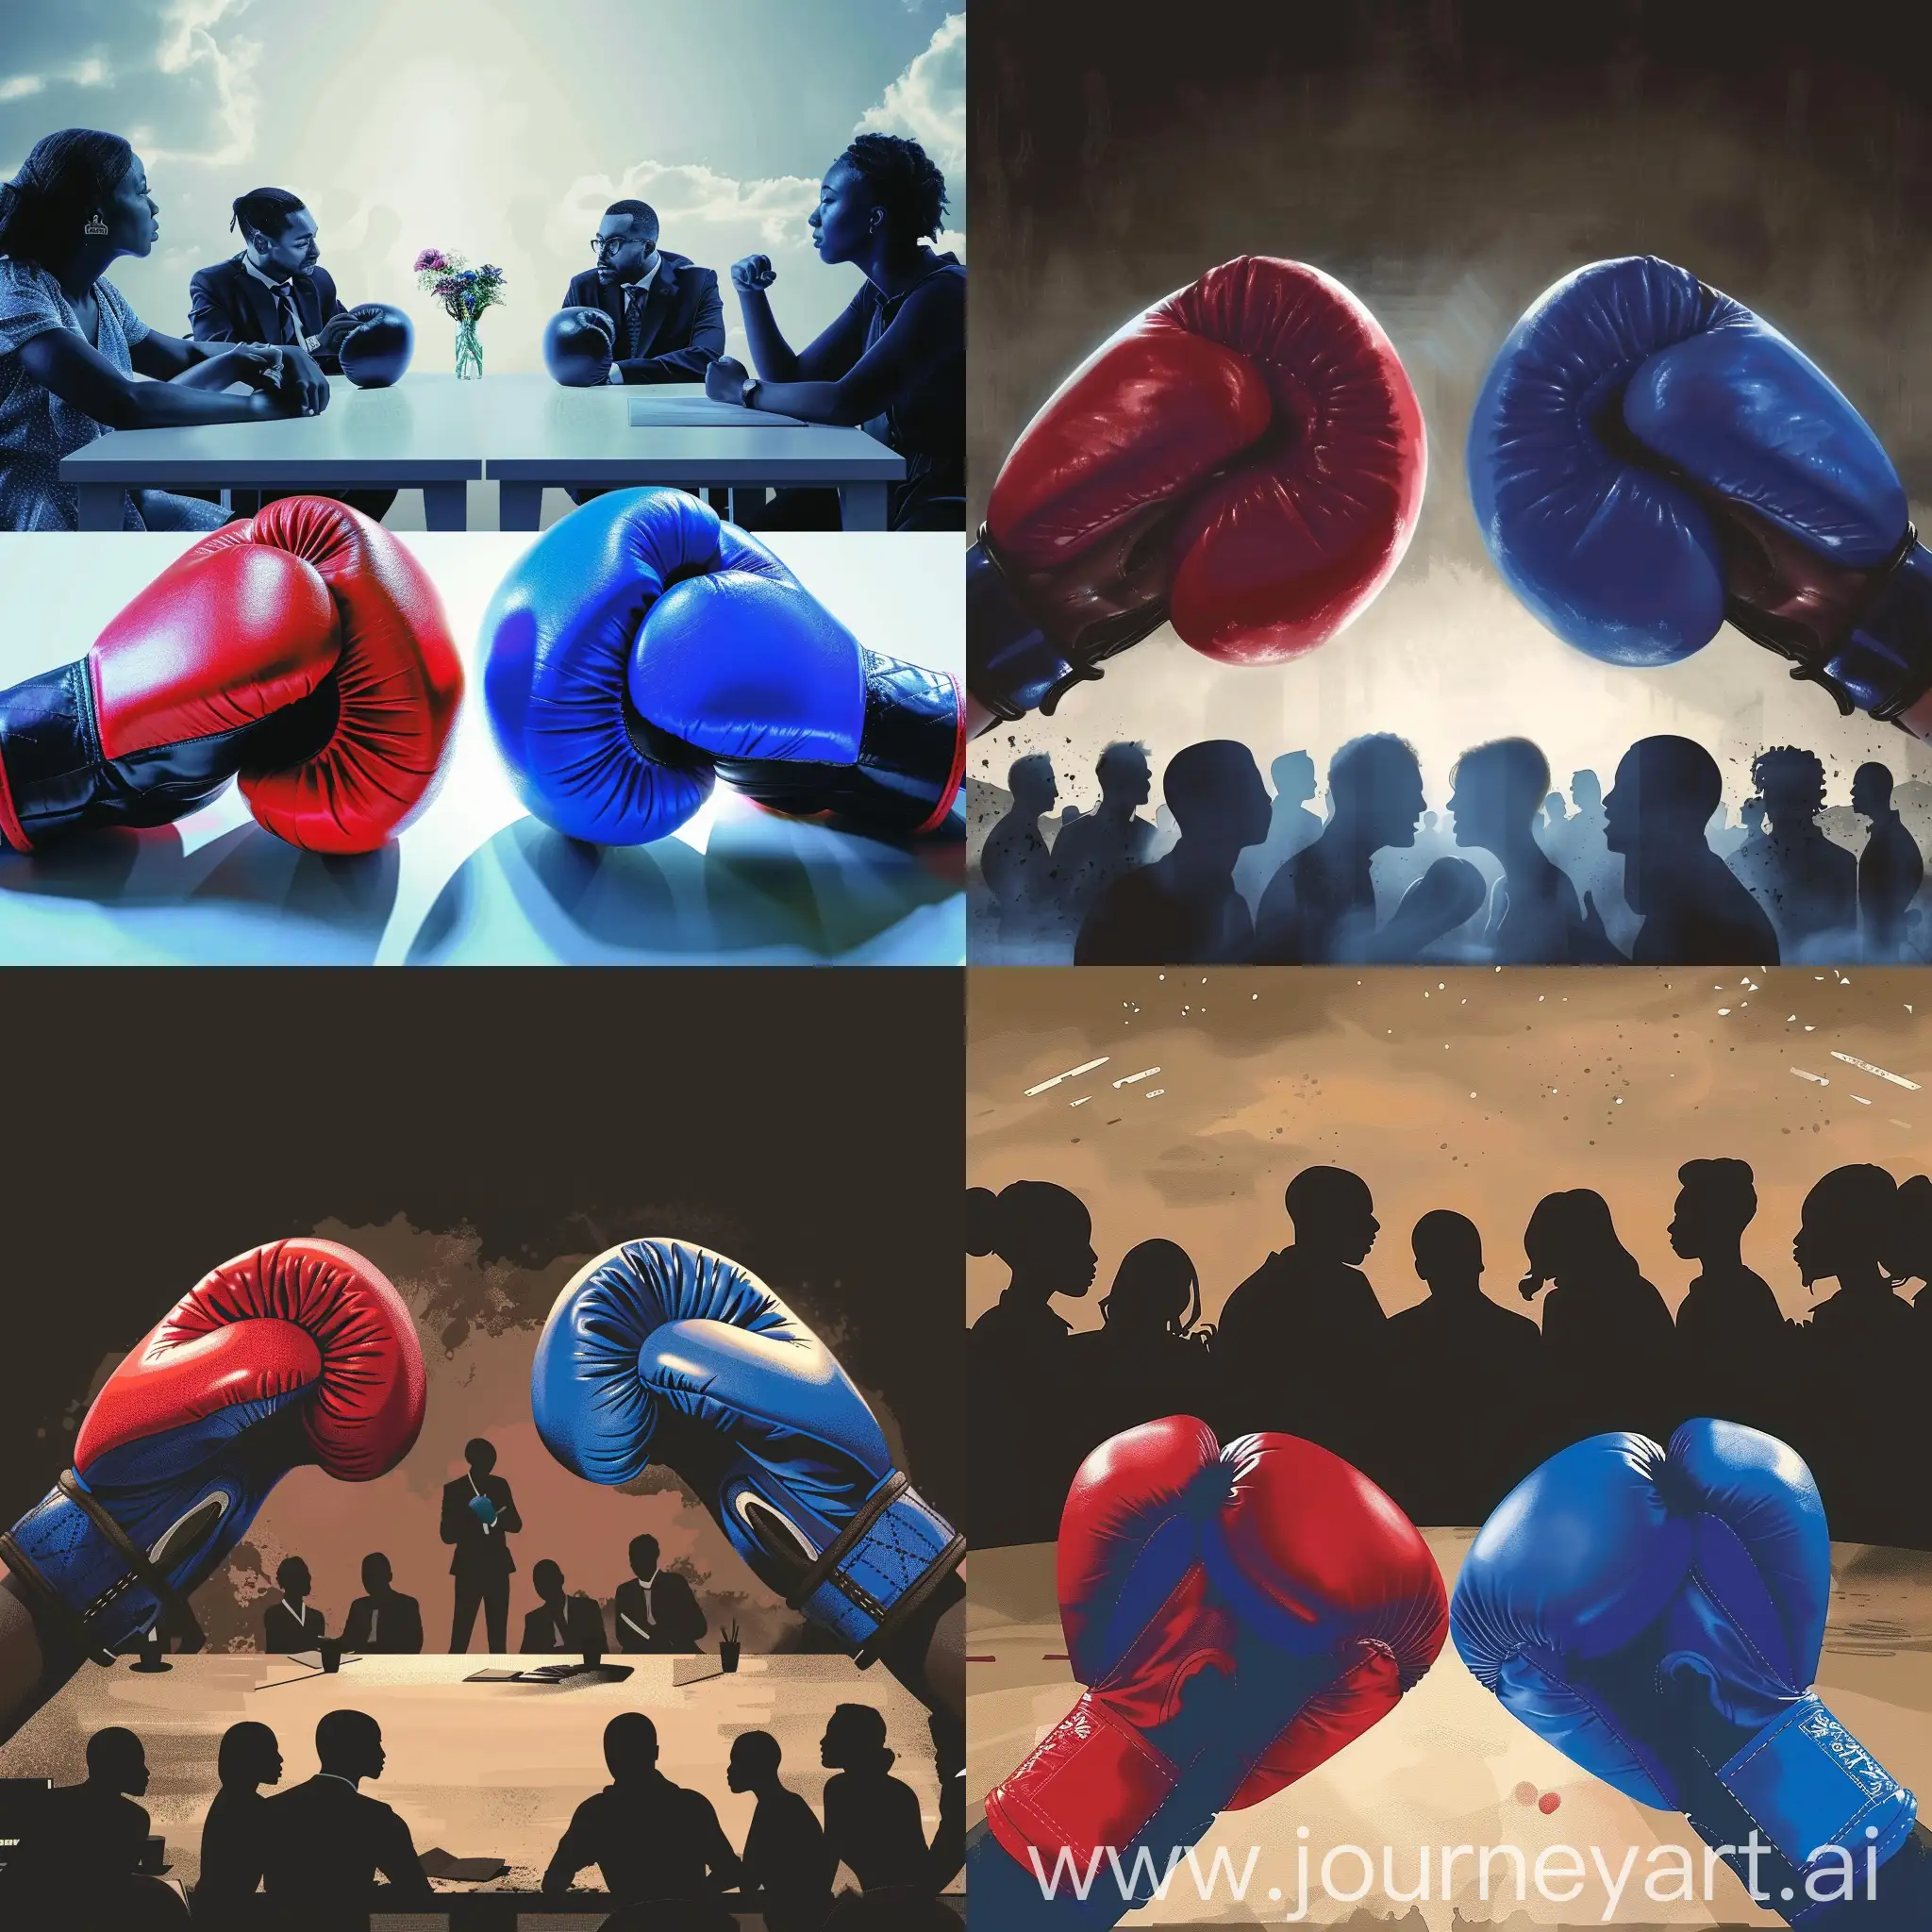 Intense-Debate-at-Apro-Dilemme-Red-vs-Blue-Boxing-Gloves-Clash